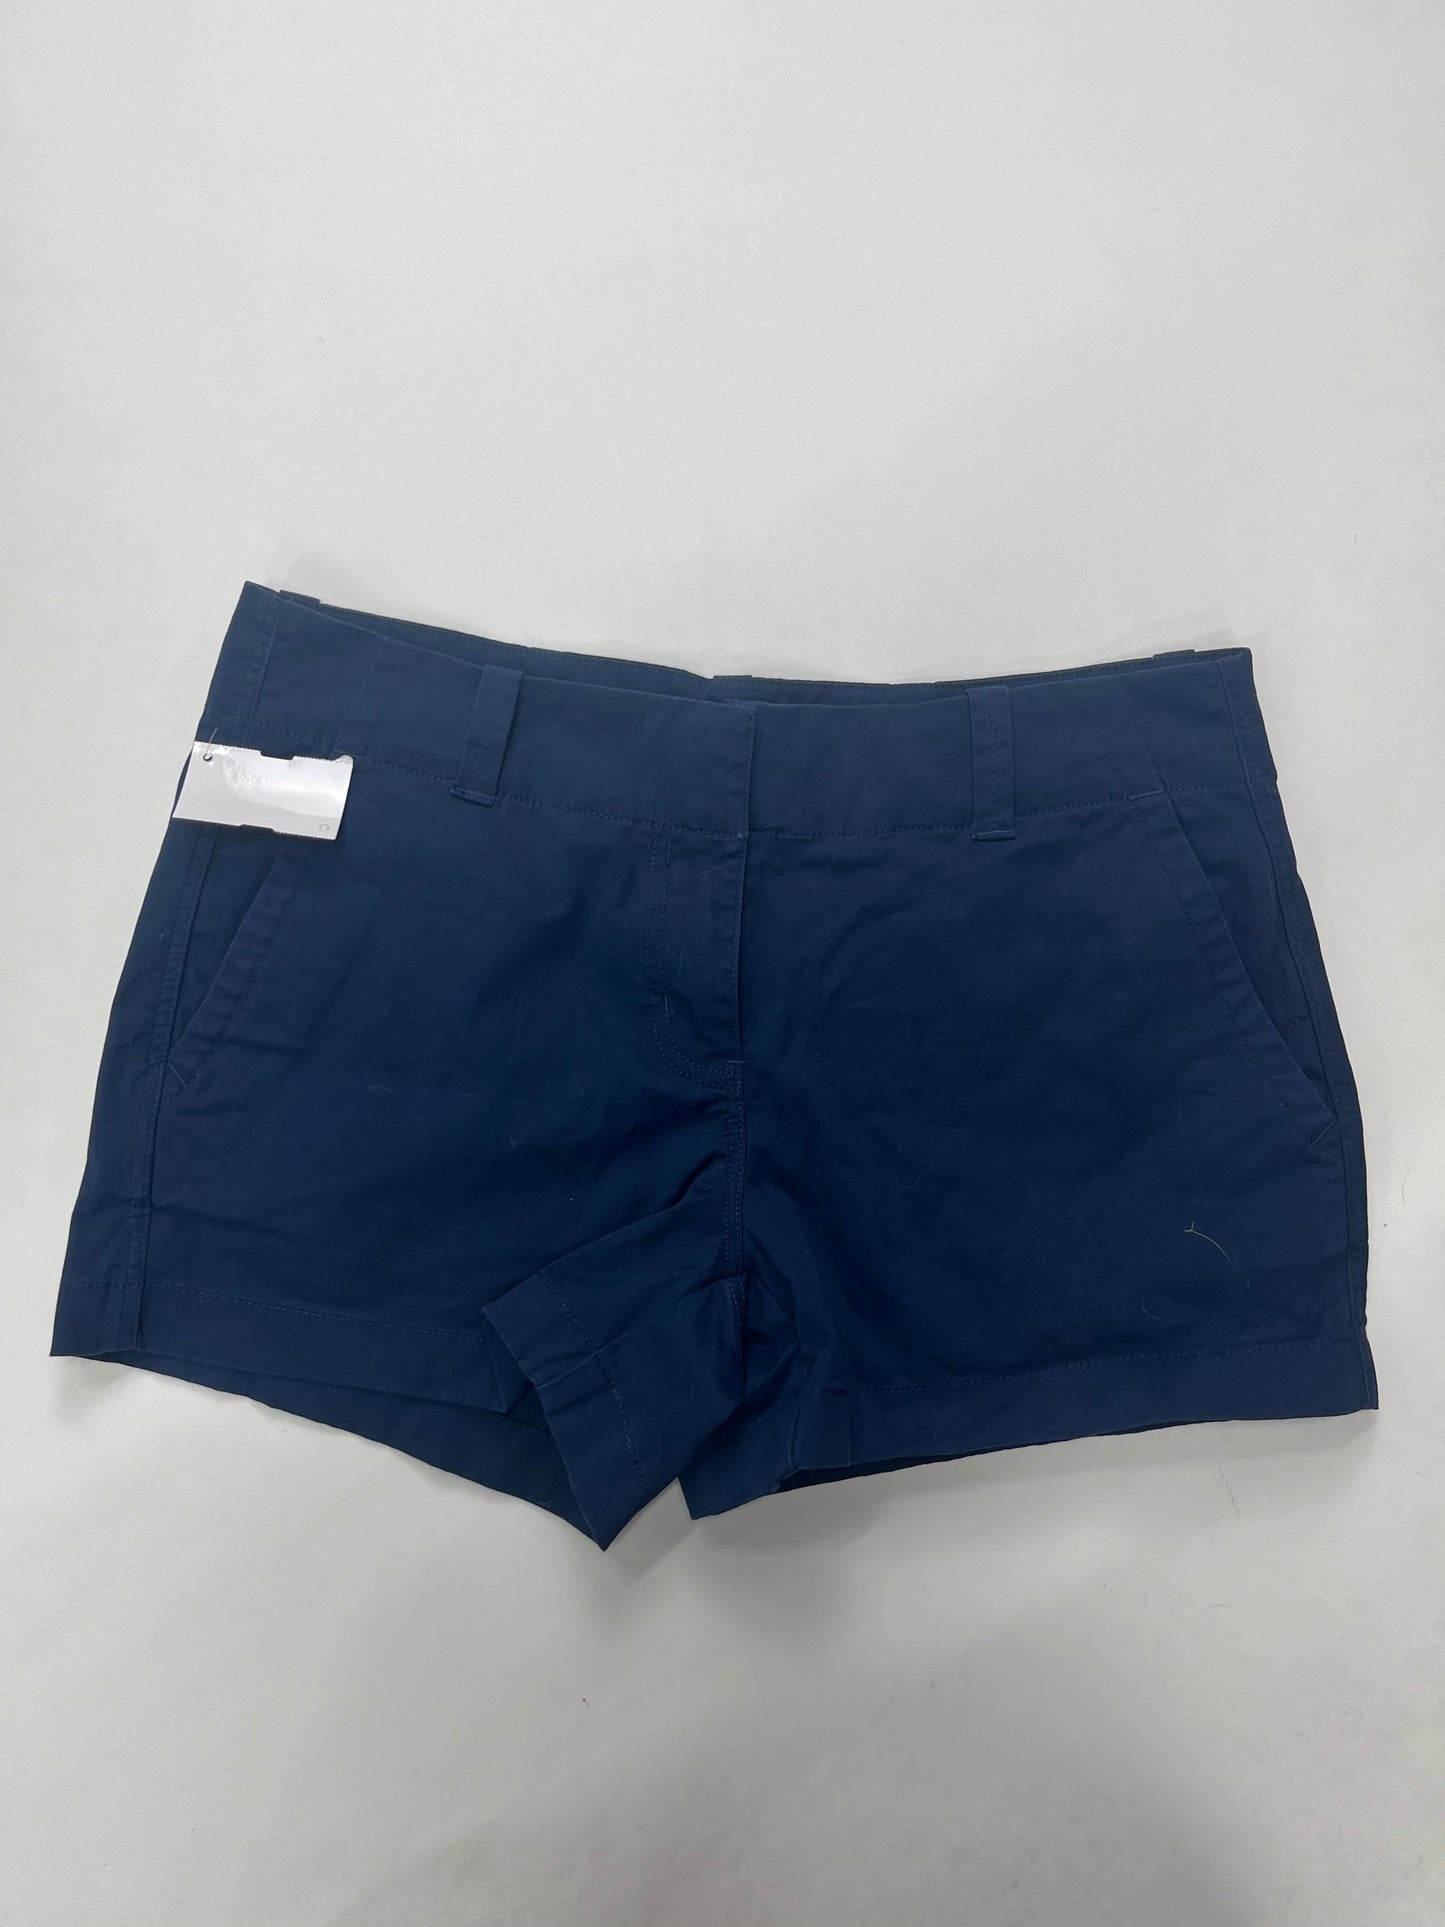 Shorts By Vineyard Vines NWT Size: 4